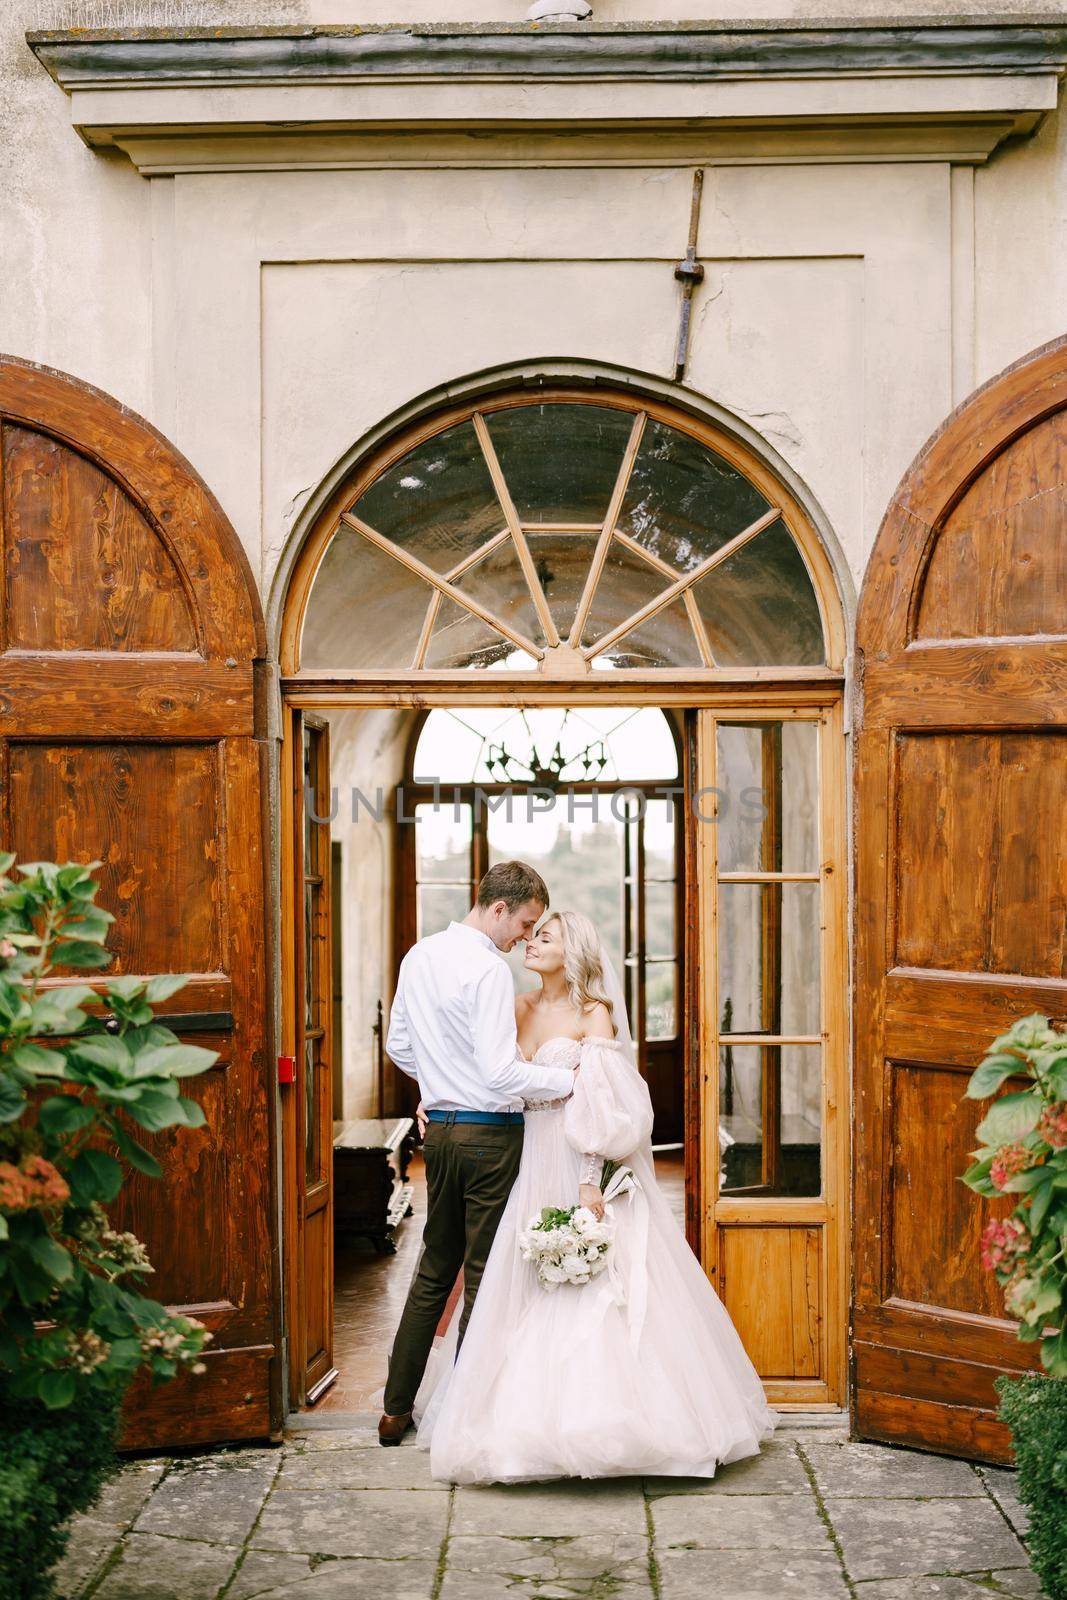 Wedding at an old winery villa in Tuscany, Italy. A wedding couple stands near the old wooden doors at the villa-winery.